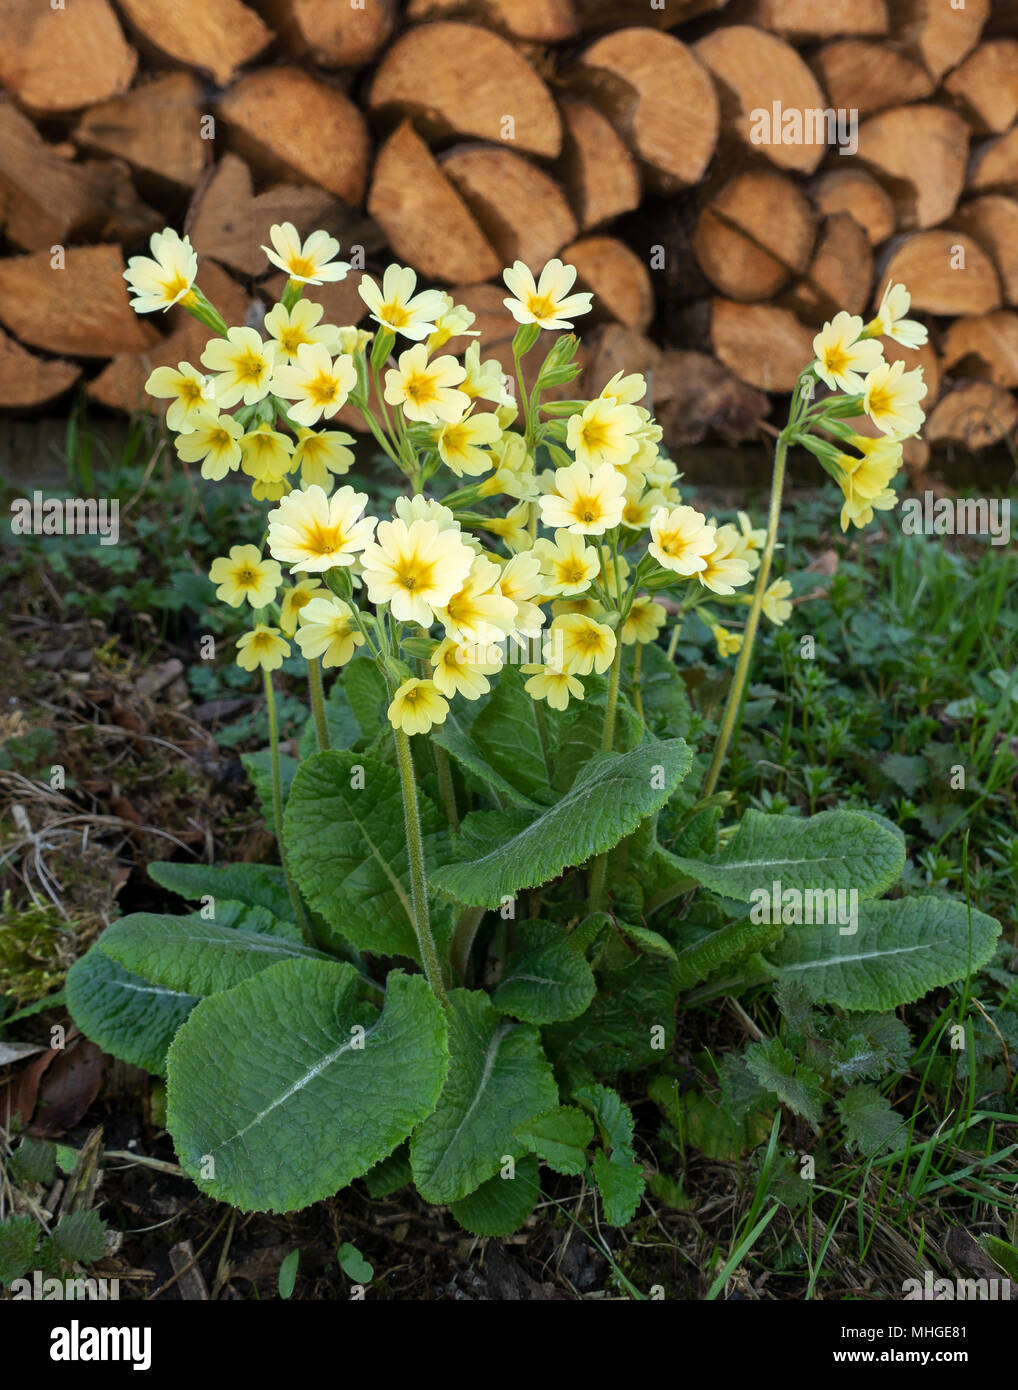 Oxlips in front of a woodpile Stock Photo